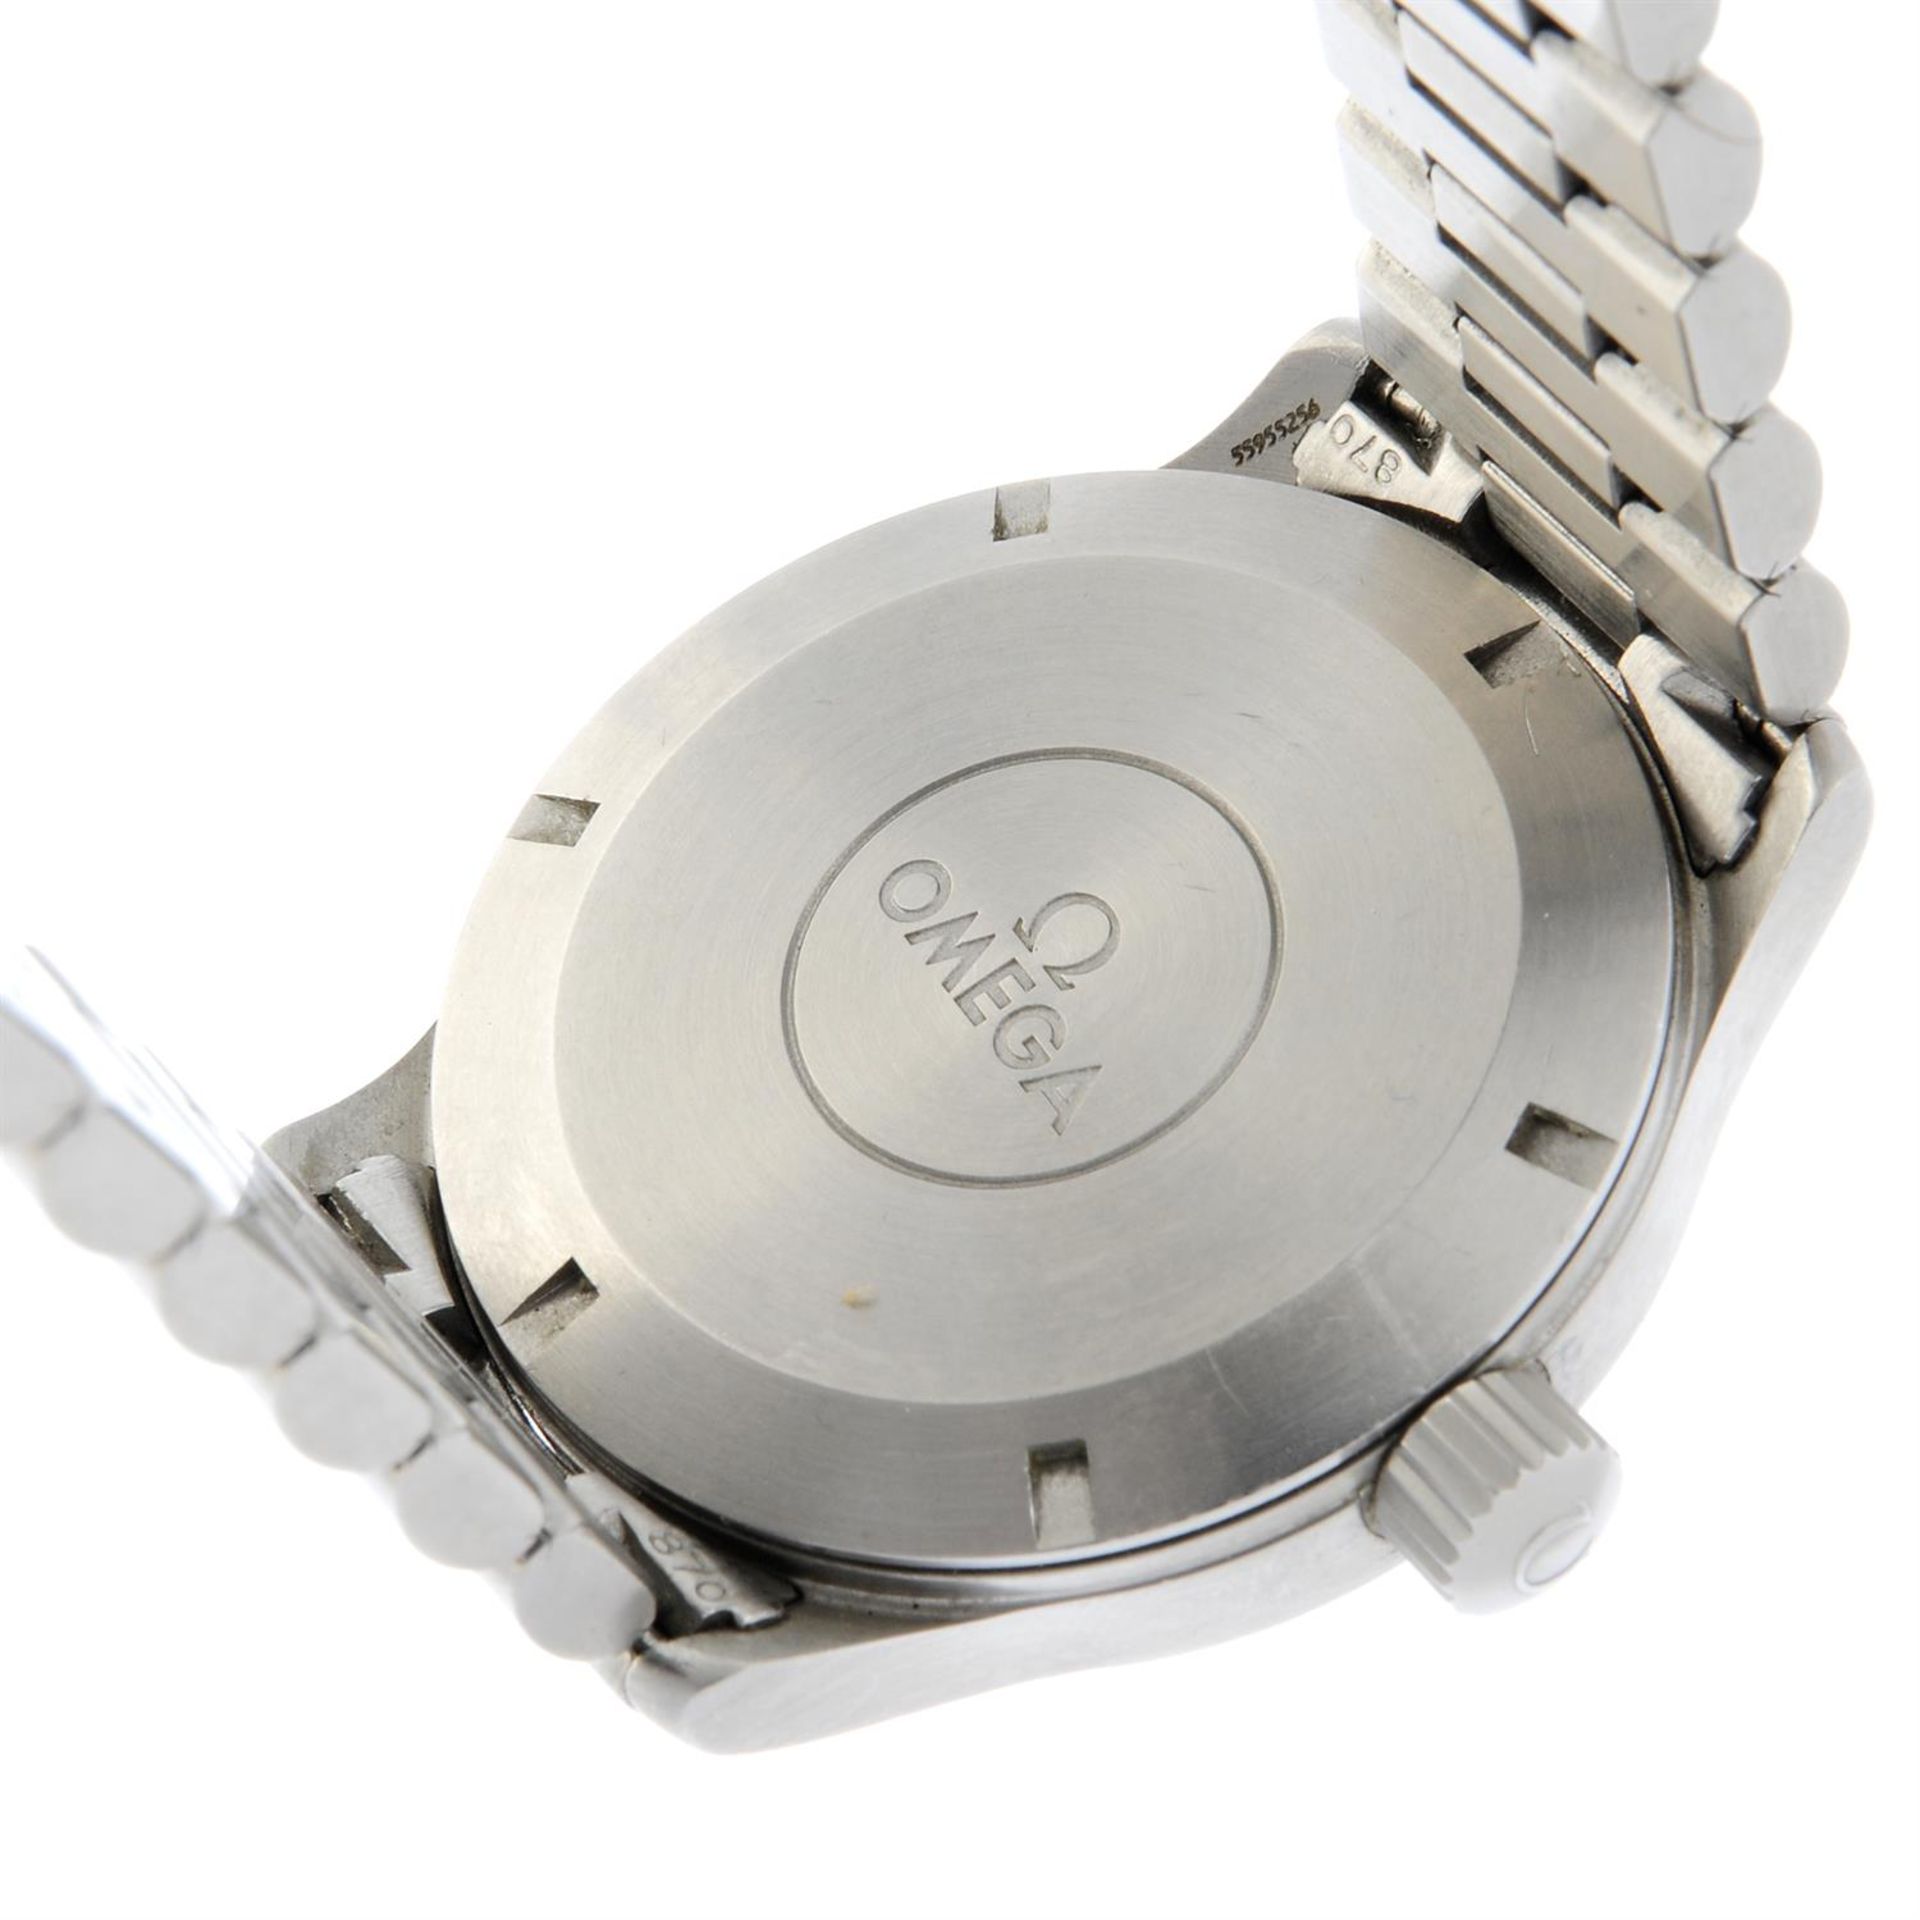 OMEGA - a stainless steel Dynamic bracelet watch, 36mm. - Image 4 of 5